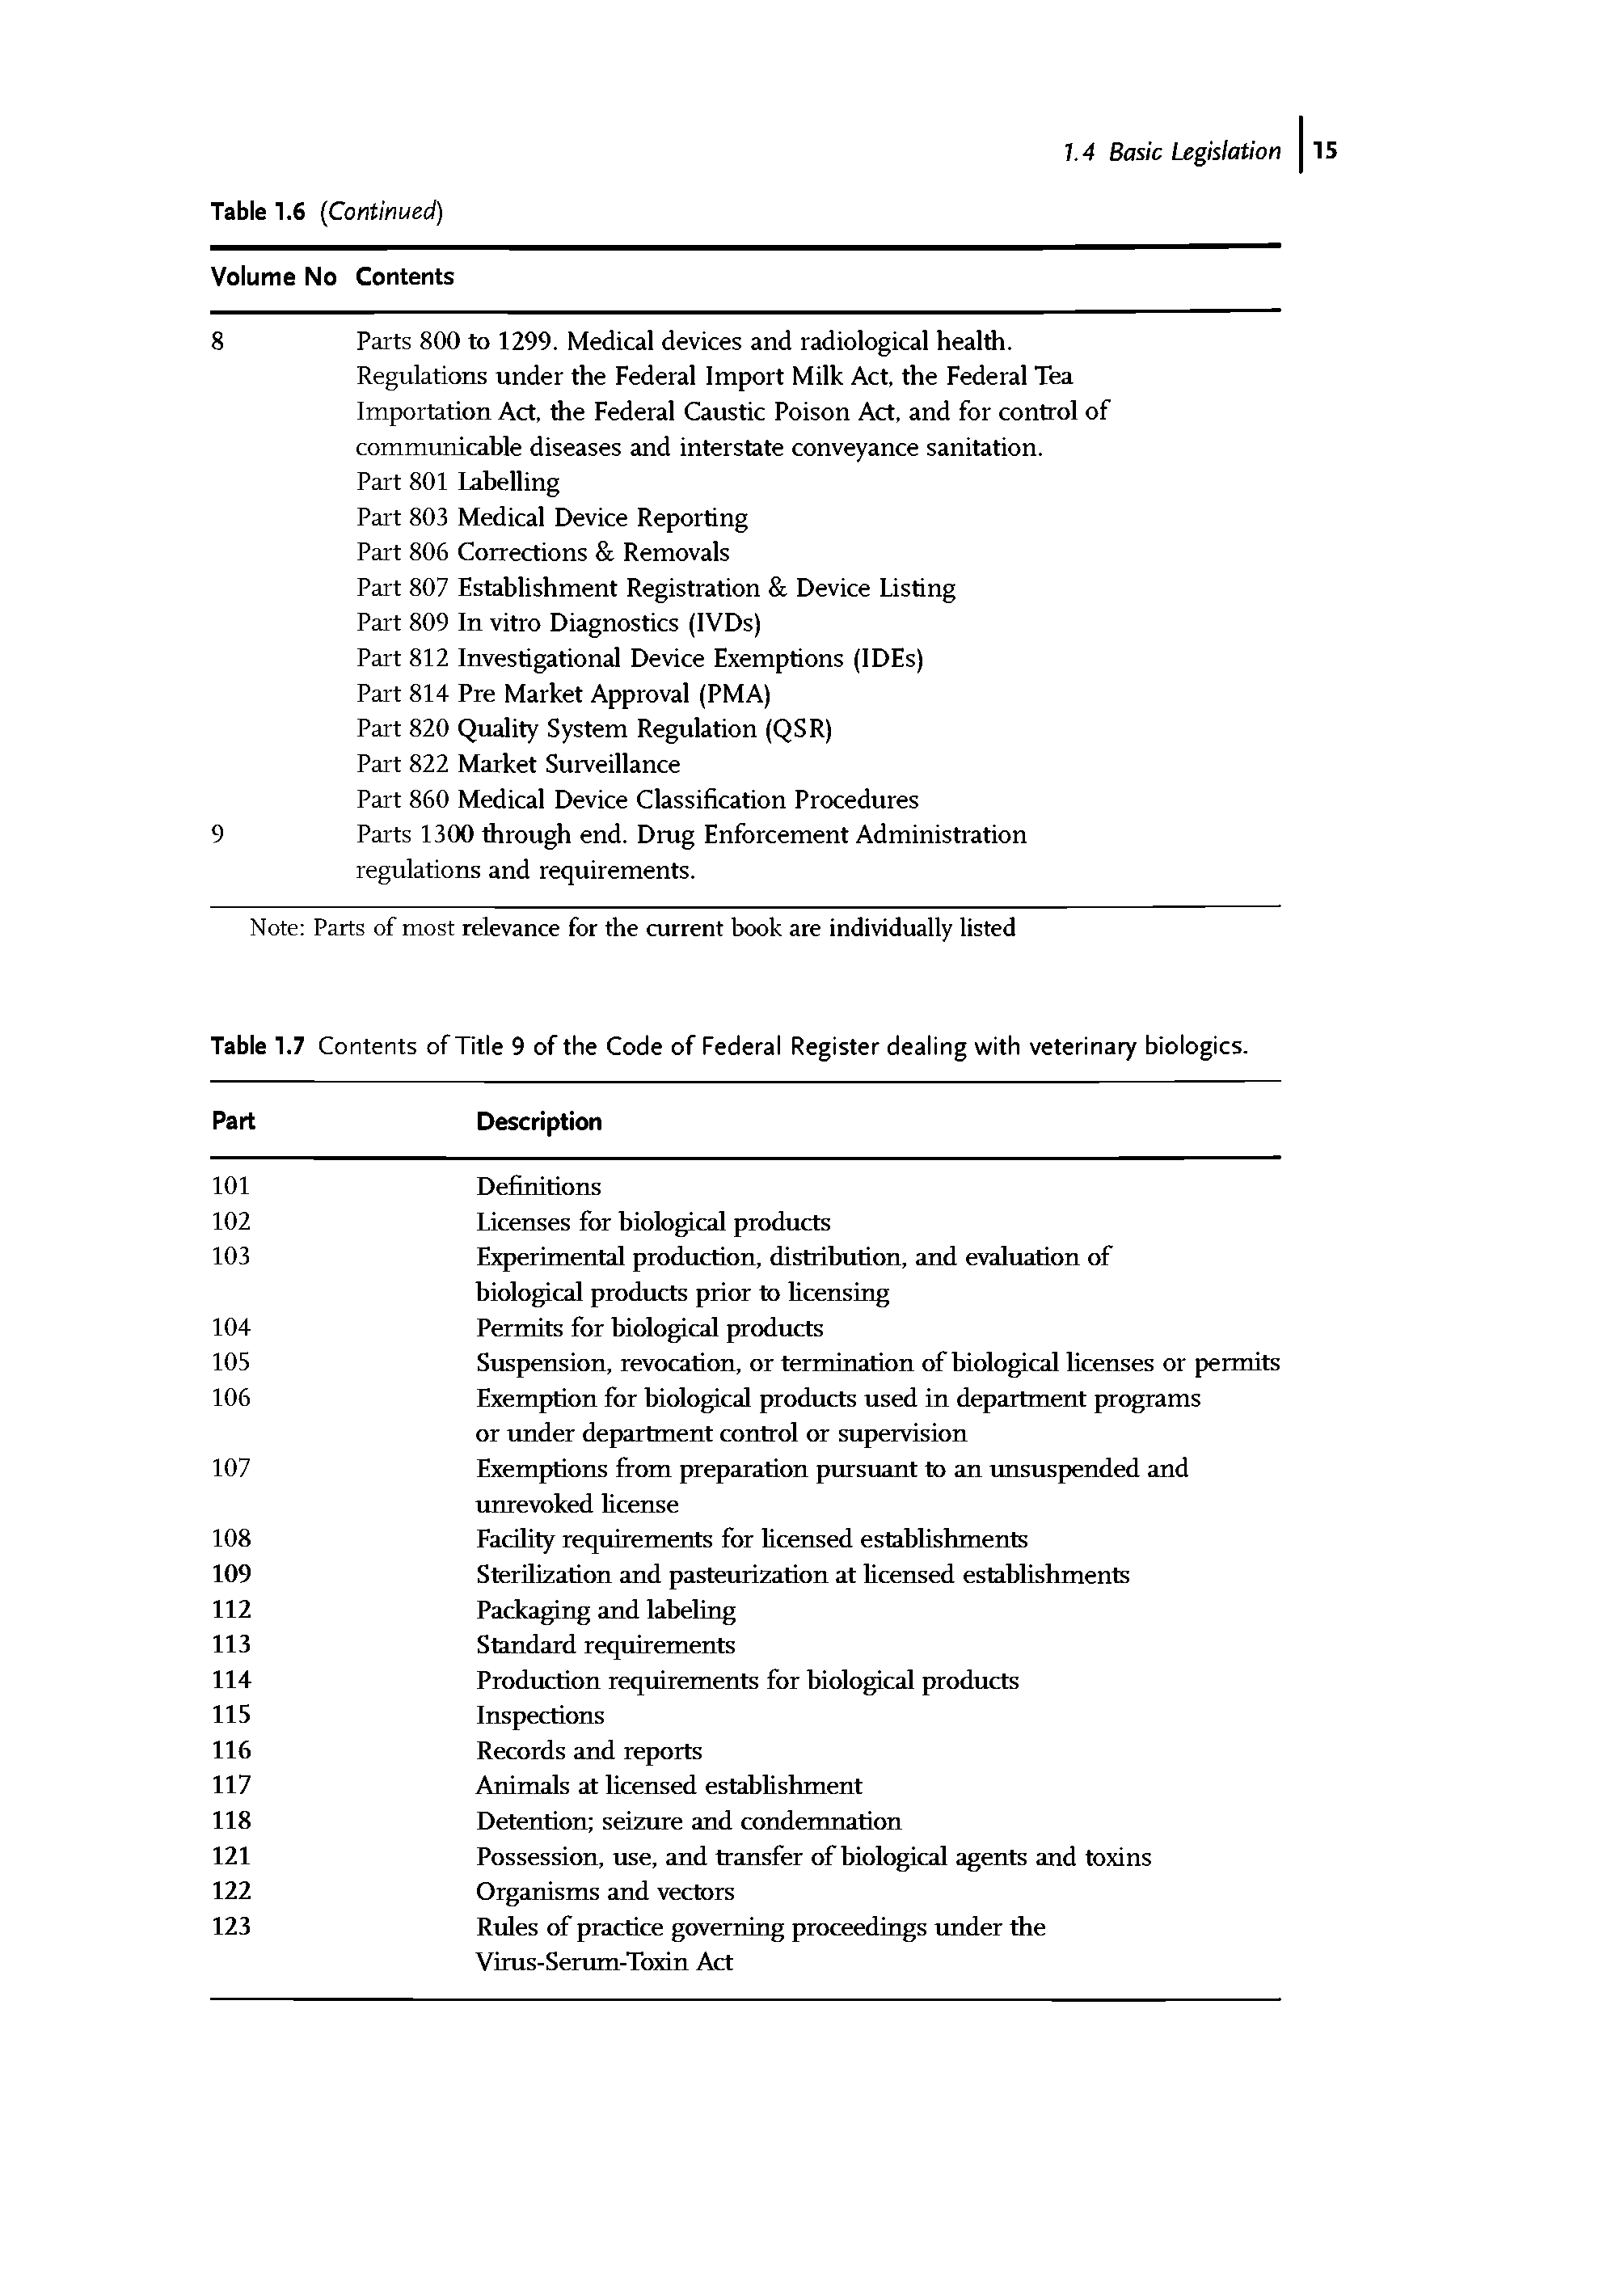 Table 1.7 Contents of Title 9 of the Code of Federal Register dealing with veterinary biologies.